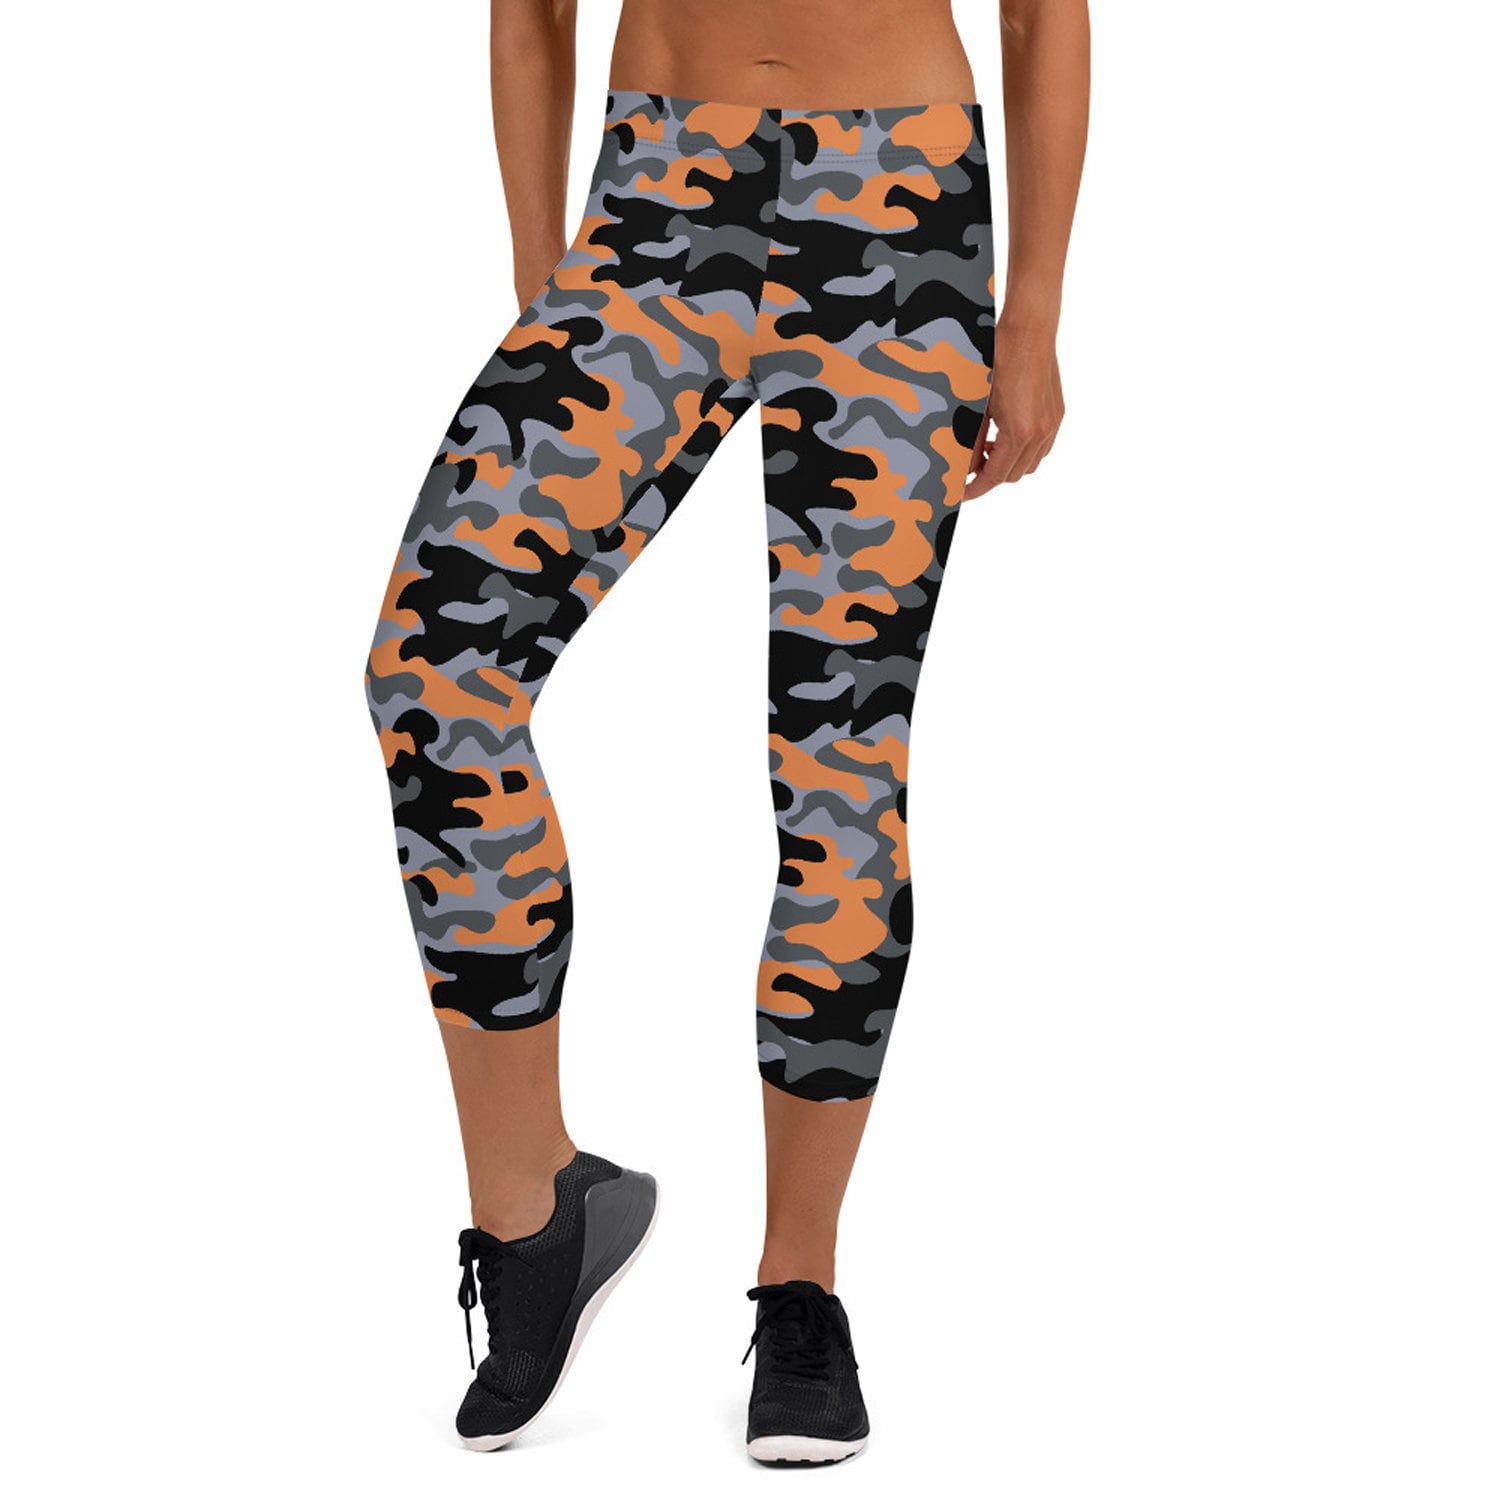 Womens Classic Yoga Pants Camo Army Camouflage Military High Waisted Capris Running Legging